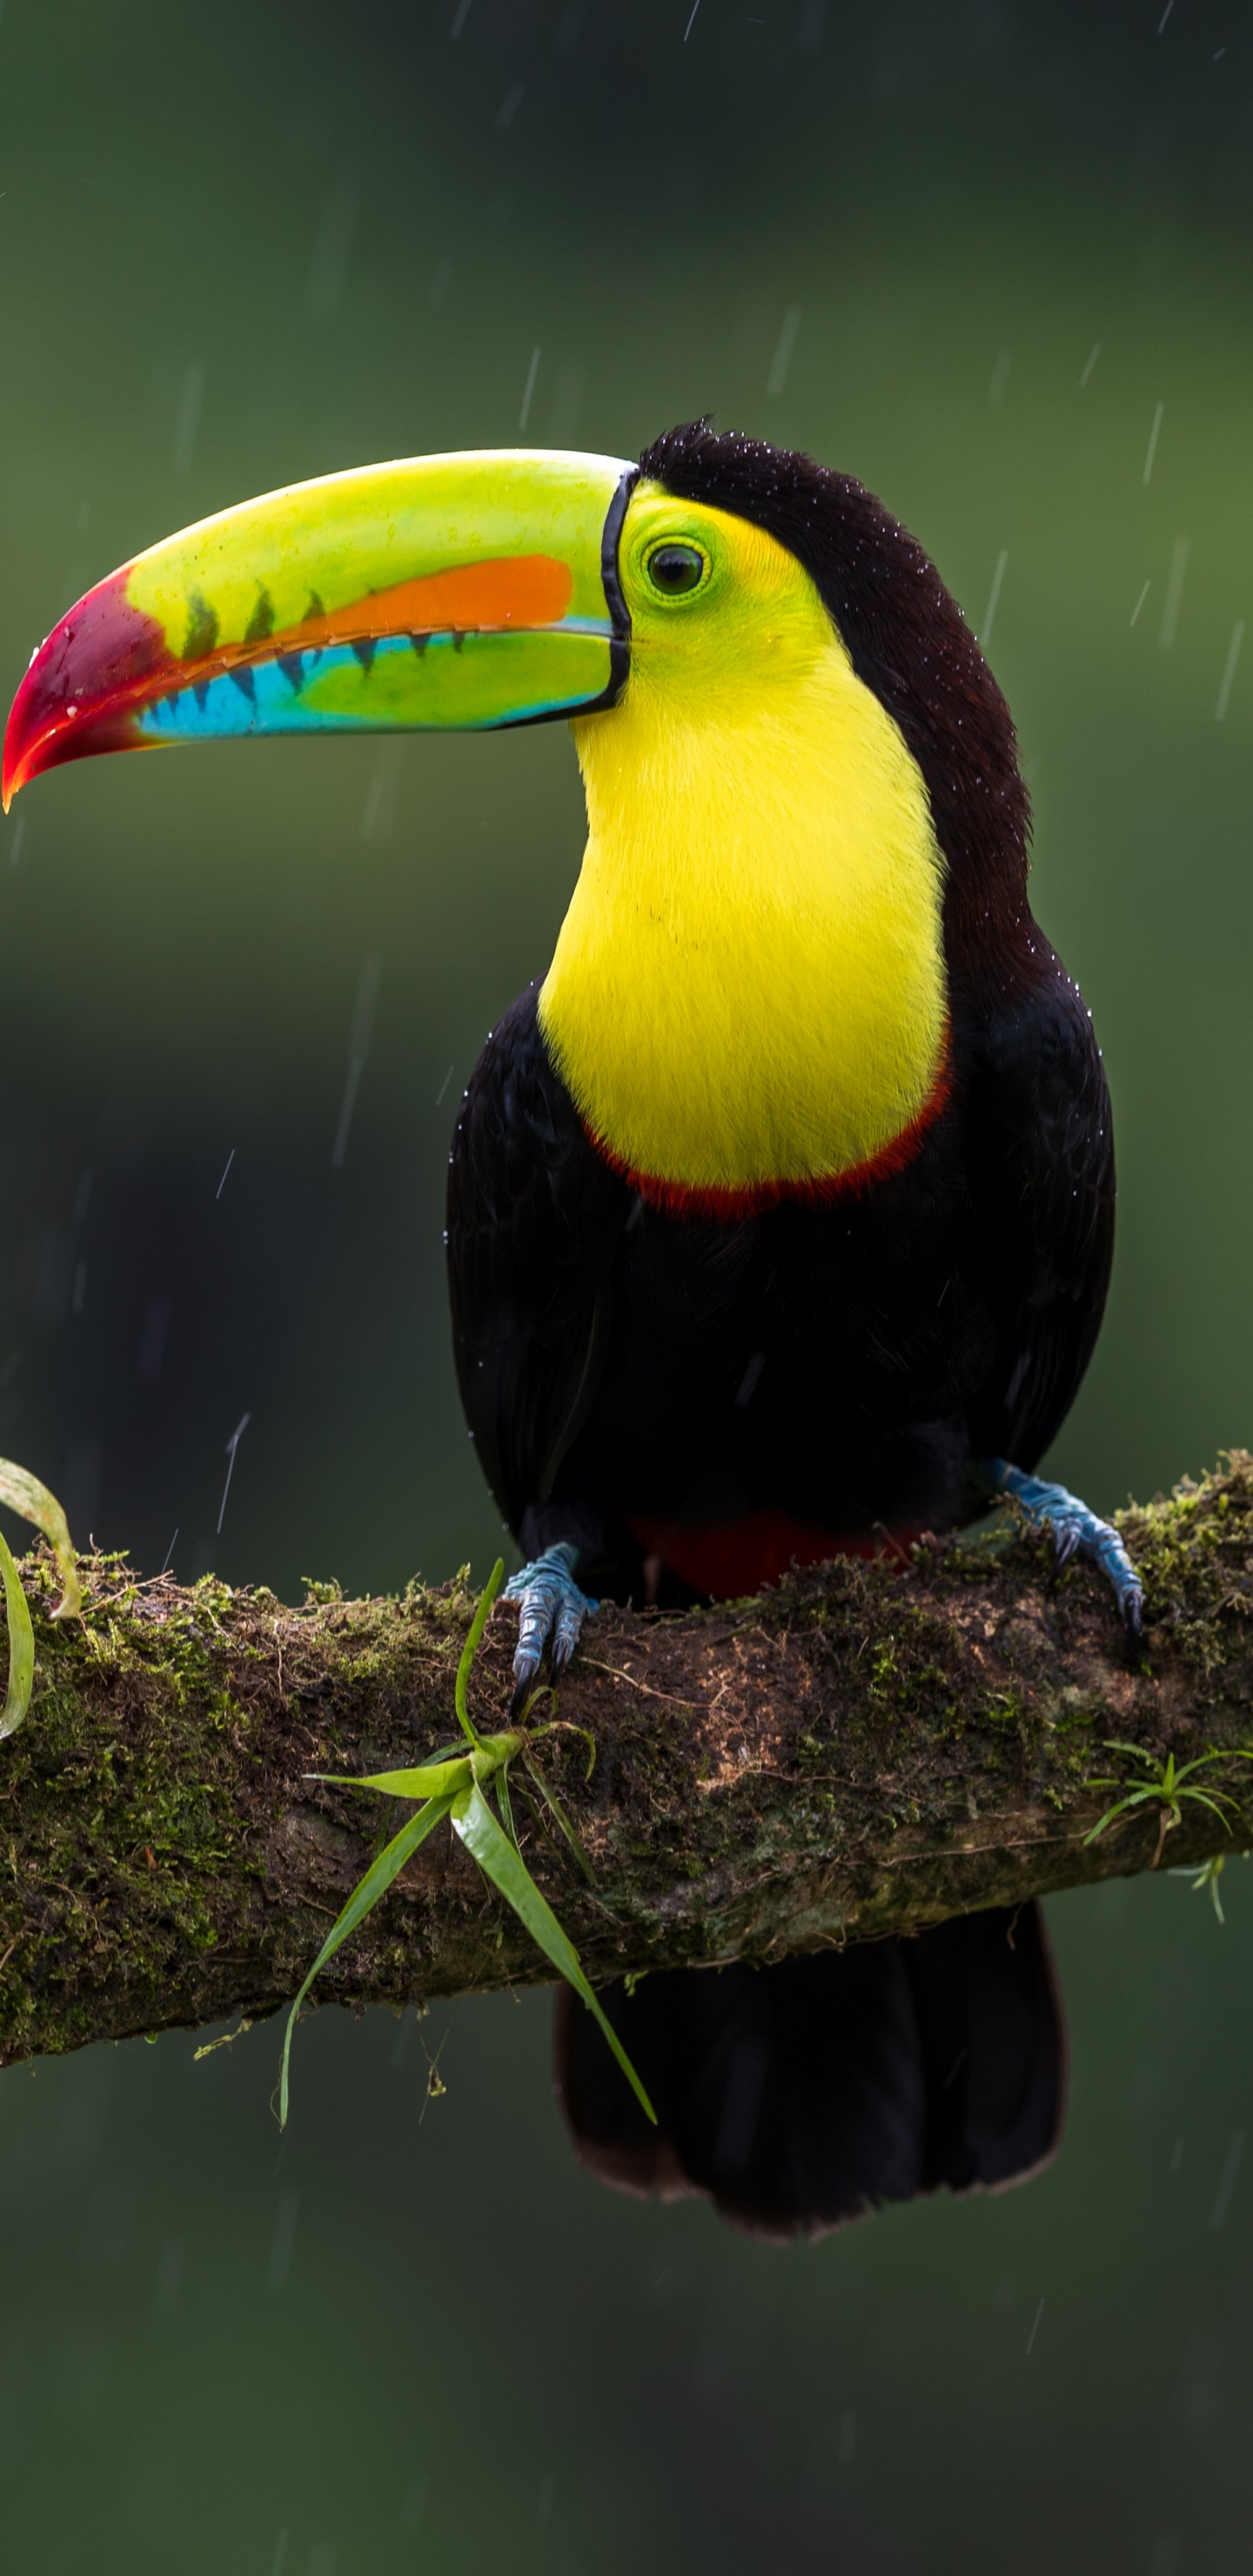 Black Yellow and Red Bird on Tree Branch. Wallpaper in 1440x2960 Resolution